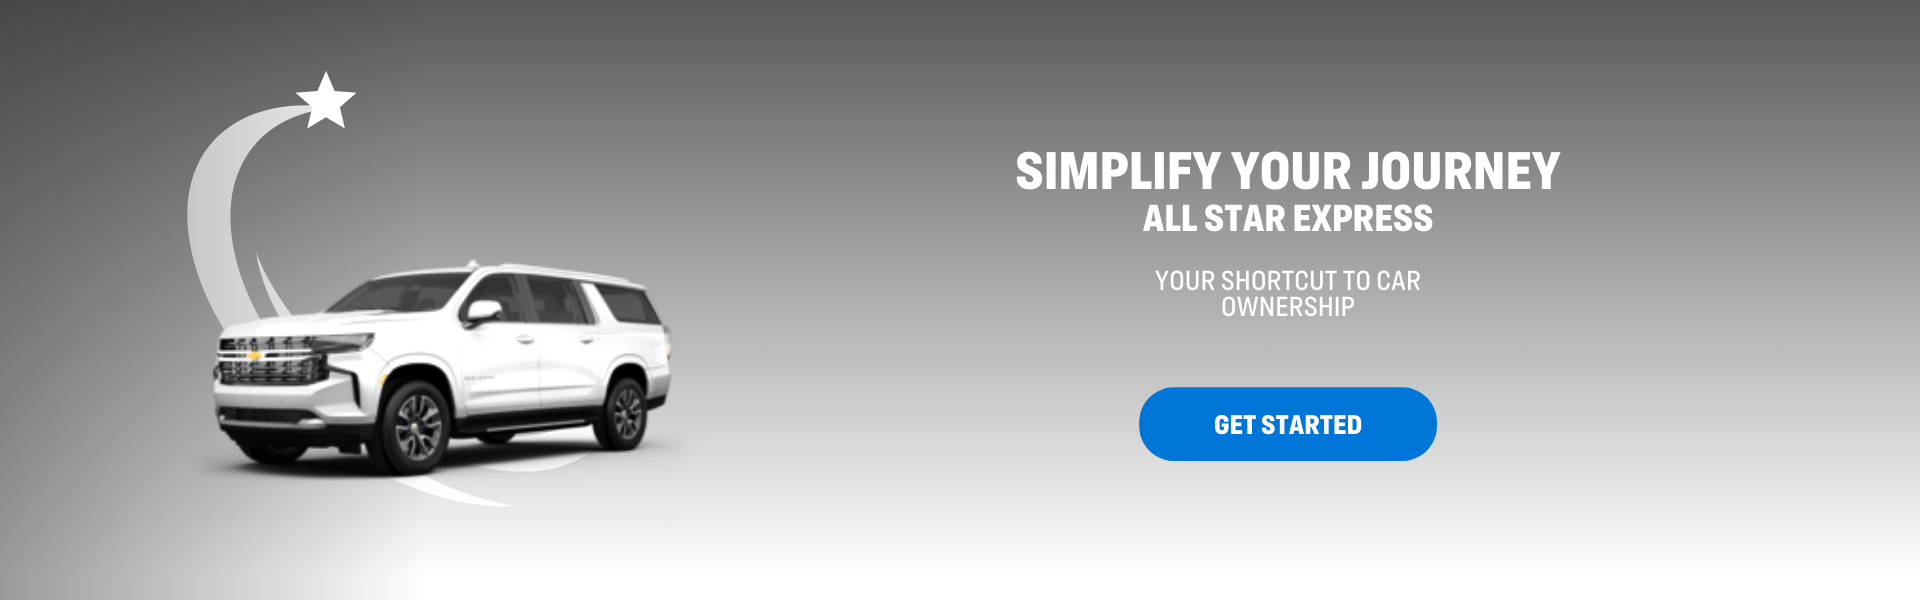 Get Started with All Star Express